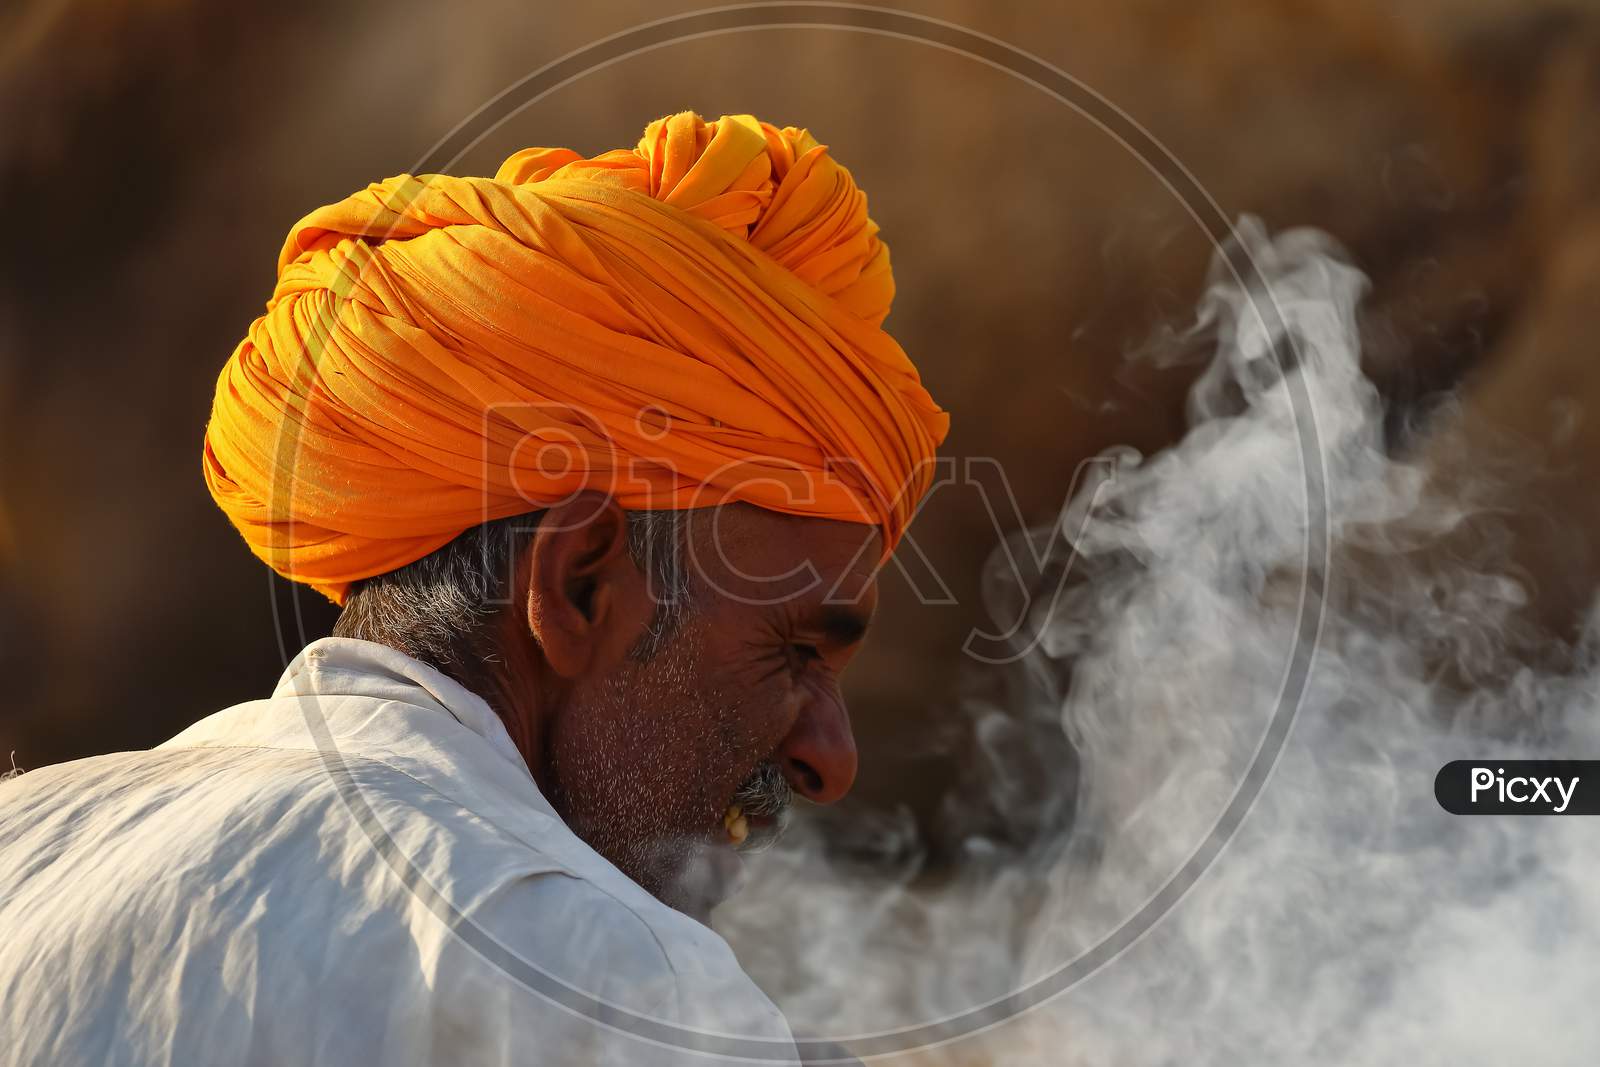 An Abstract side portrait of a Rajasthani man wearing an orange turban with smoke around him